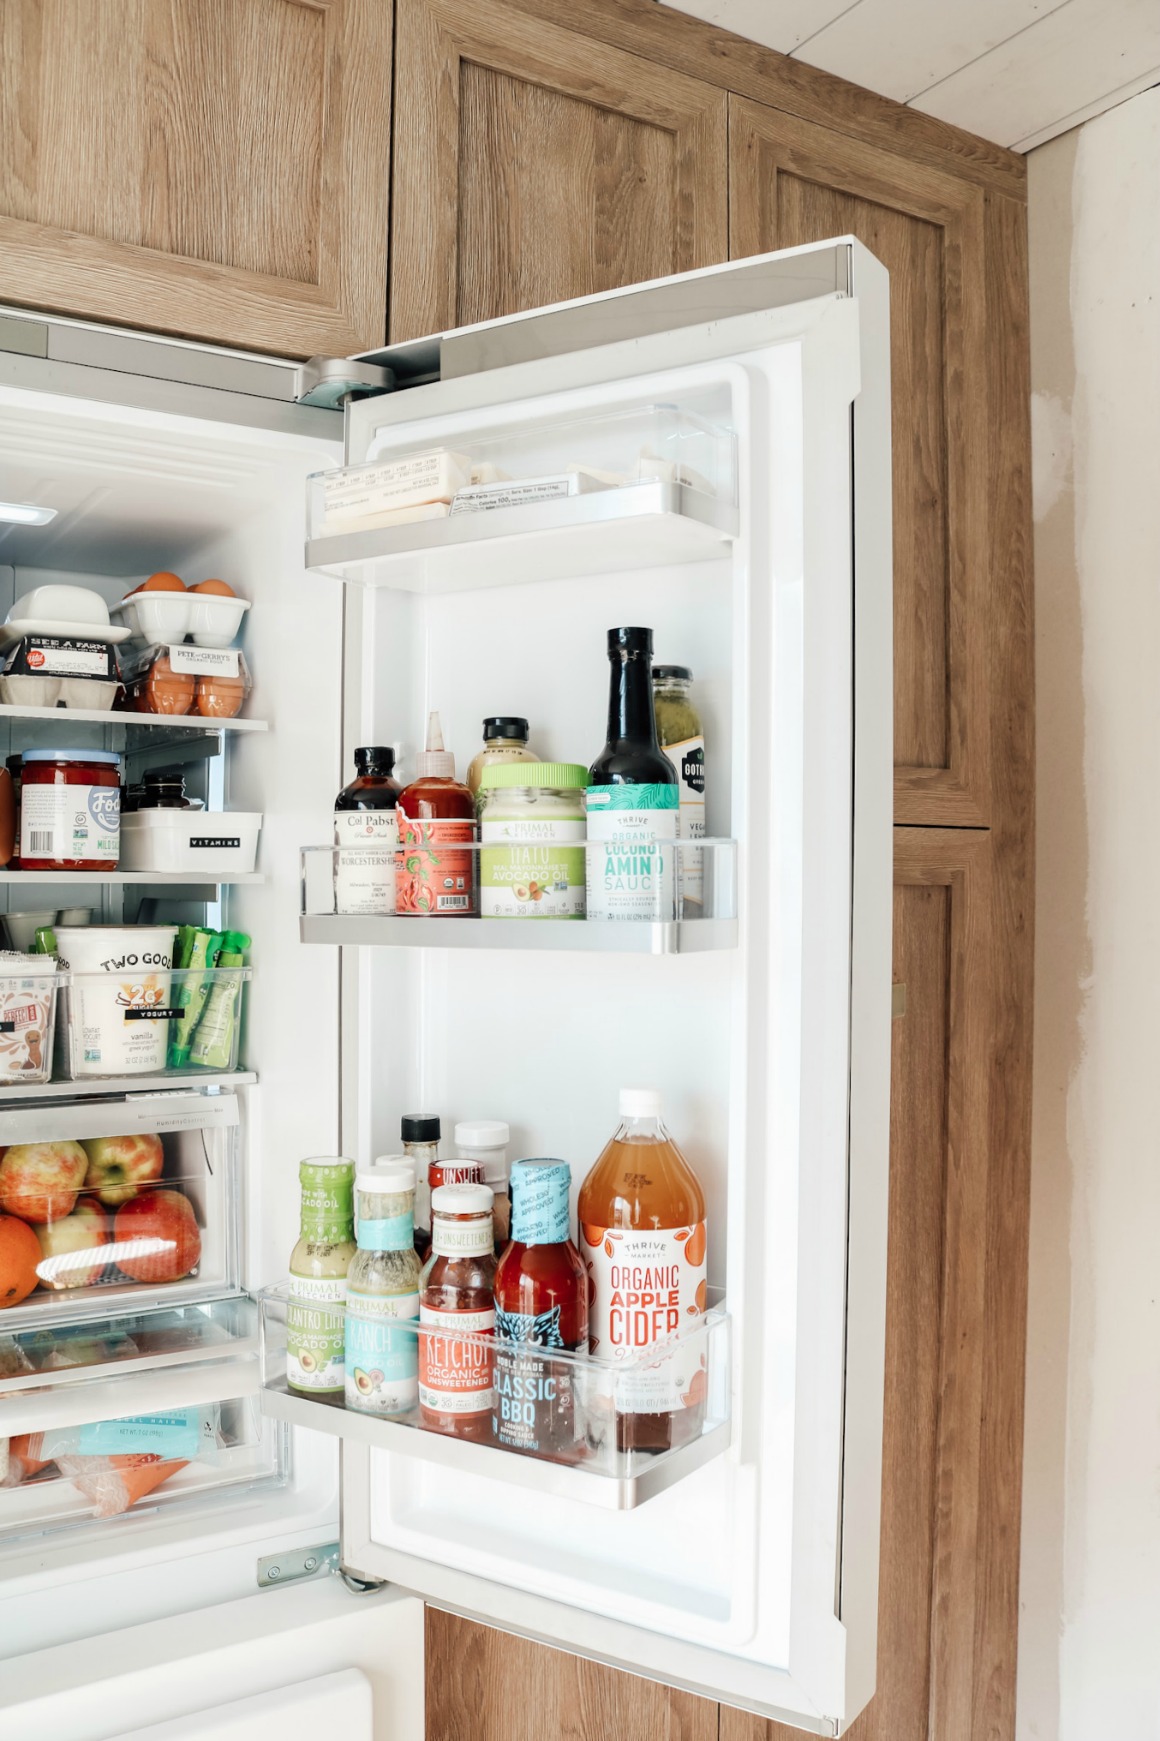 Inside our Fridge and Favorite things to Organize Fridge - Nesting